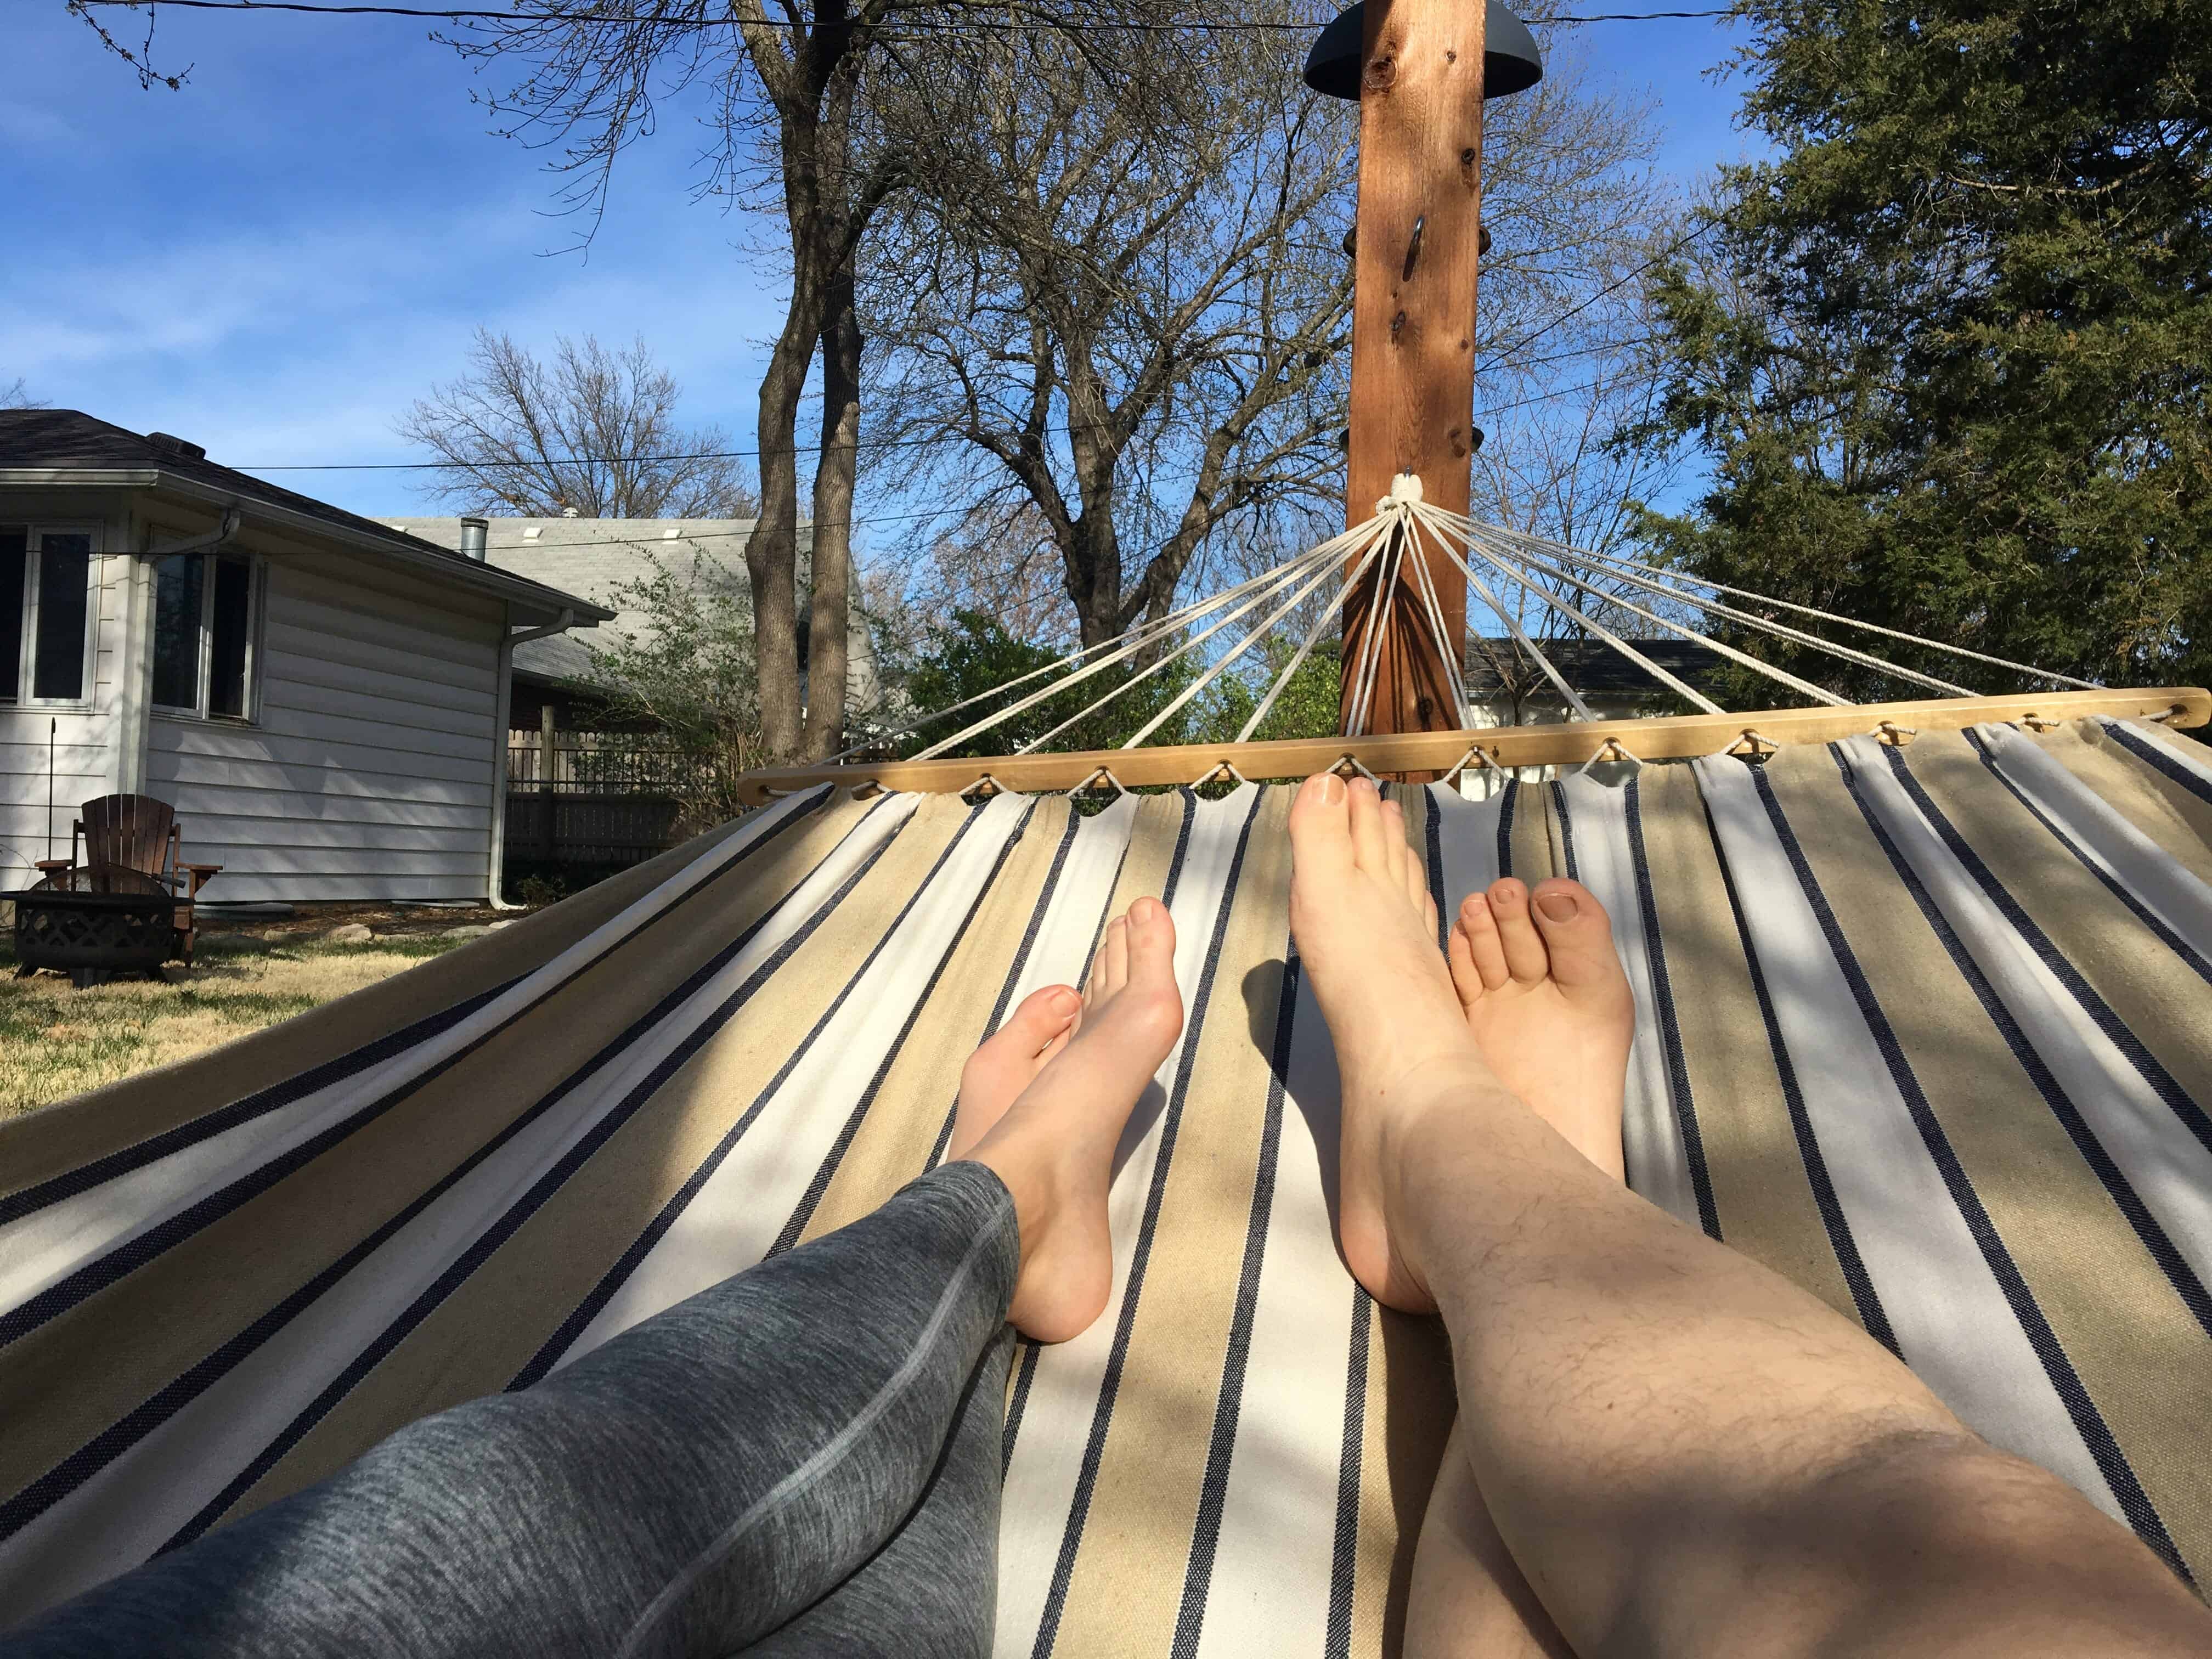 Kicking our feet up and relaxing in our new hammock